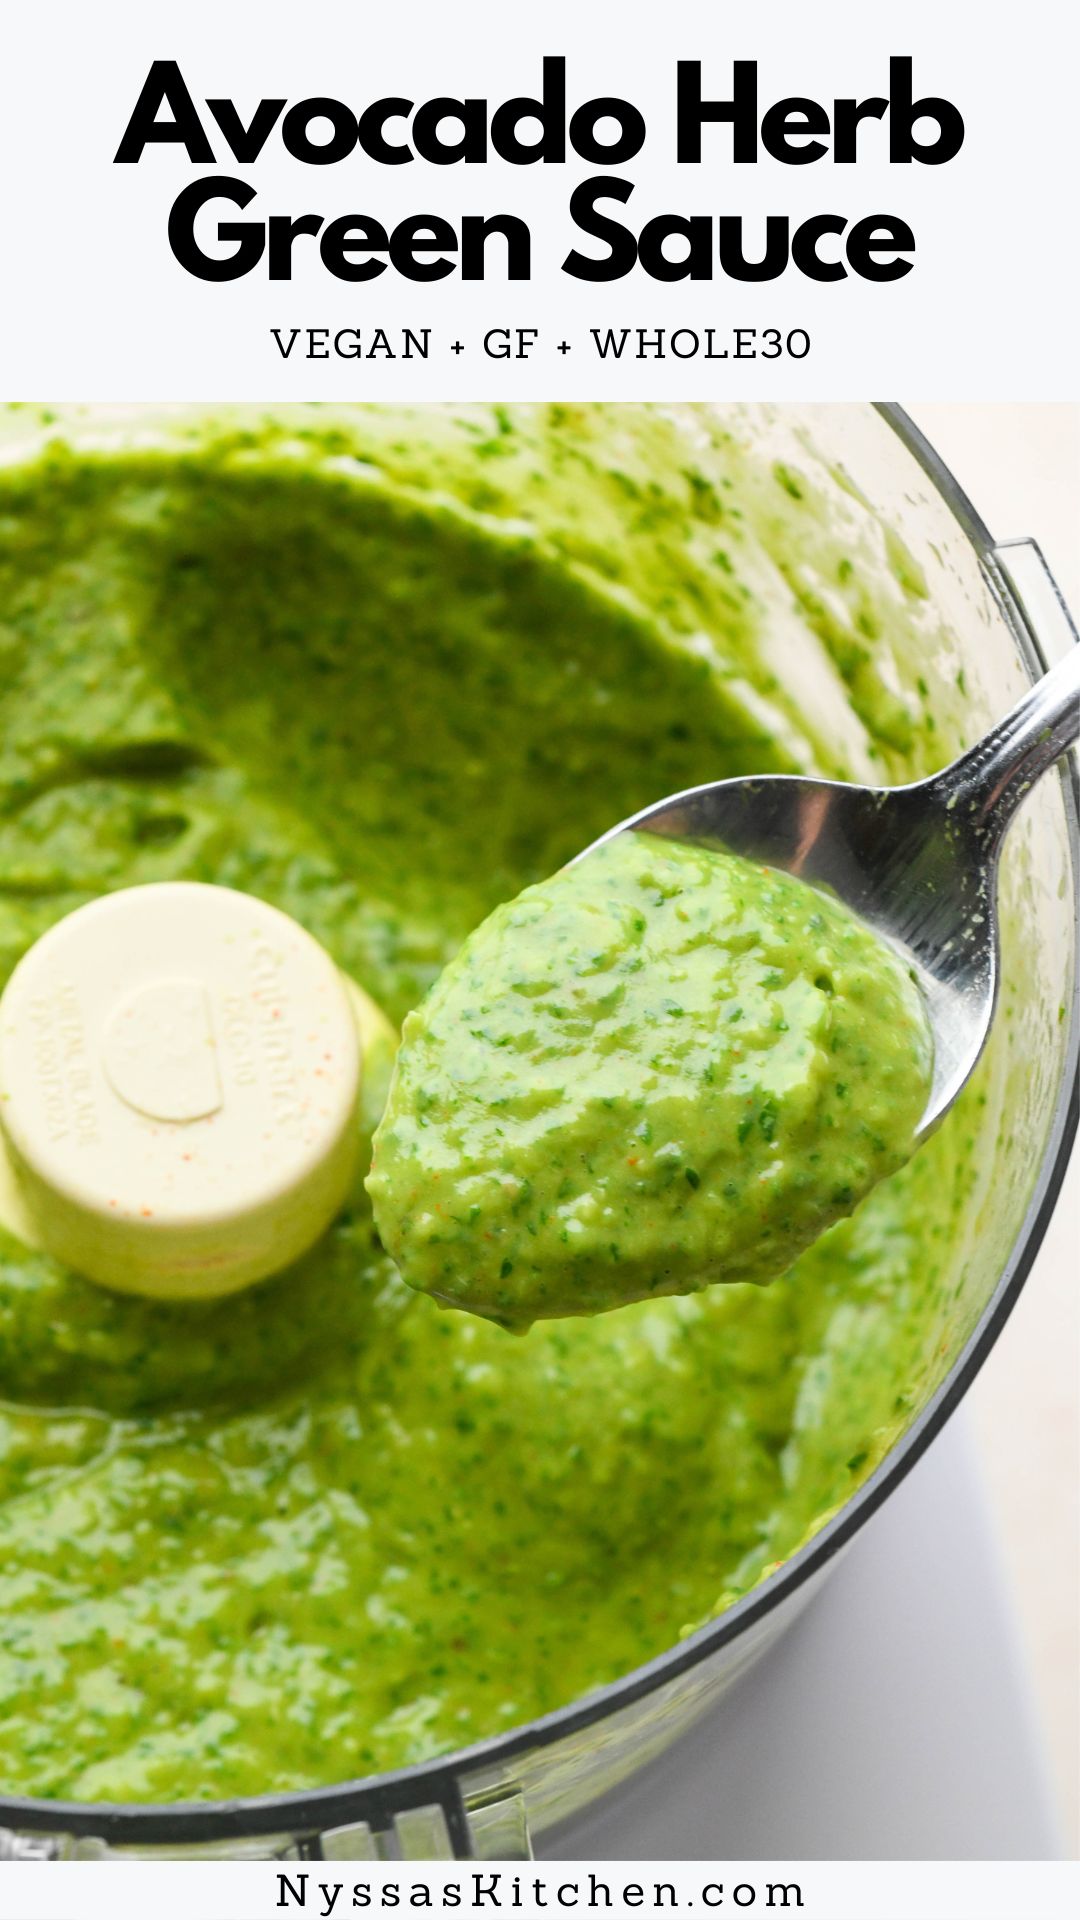 This avocado herb green sauce is the best all purpose green sauce! Perfect for everything from tacos to salads. Healthy, full of bright green flavor, and ready in only 5 minutes. Vegan, vegetarian, gluten free, Whole30, and paleo.